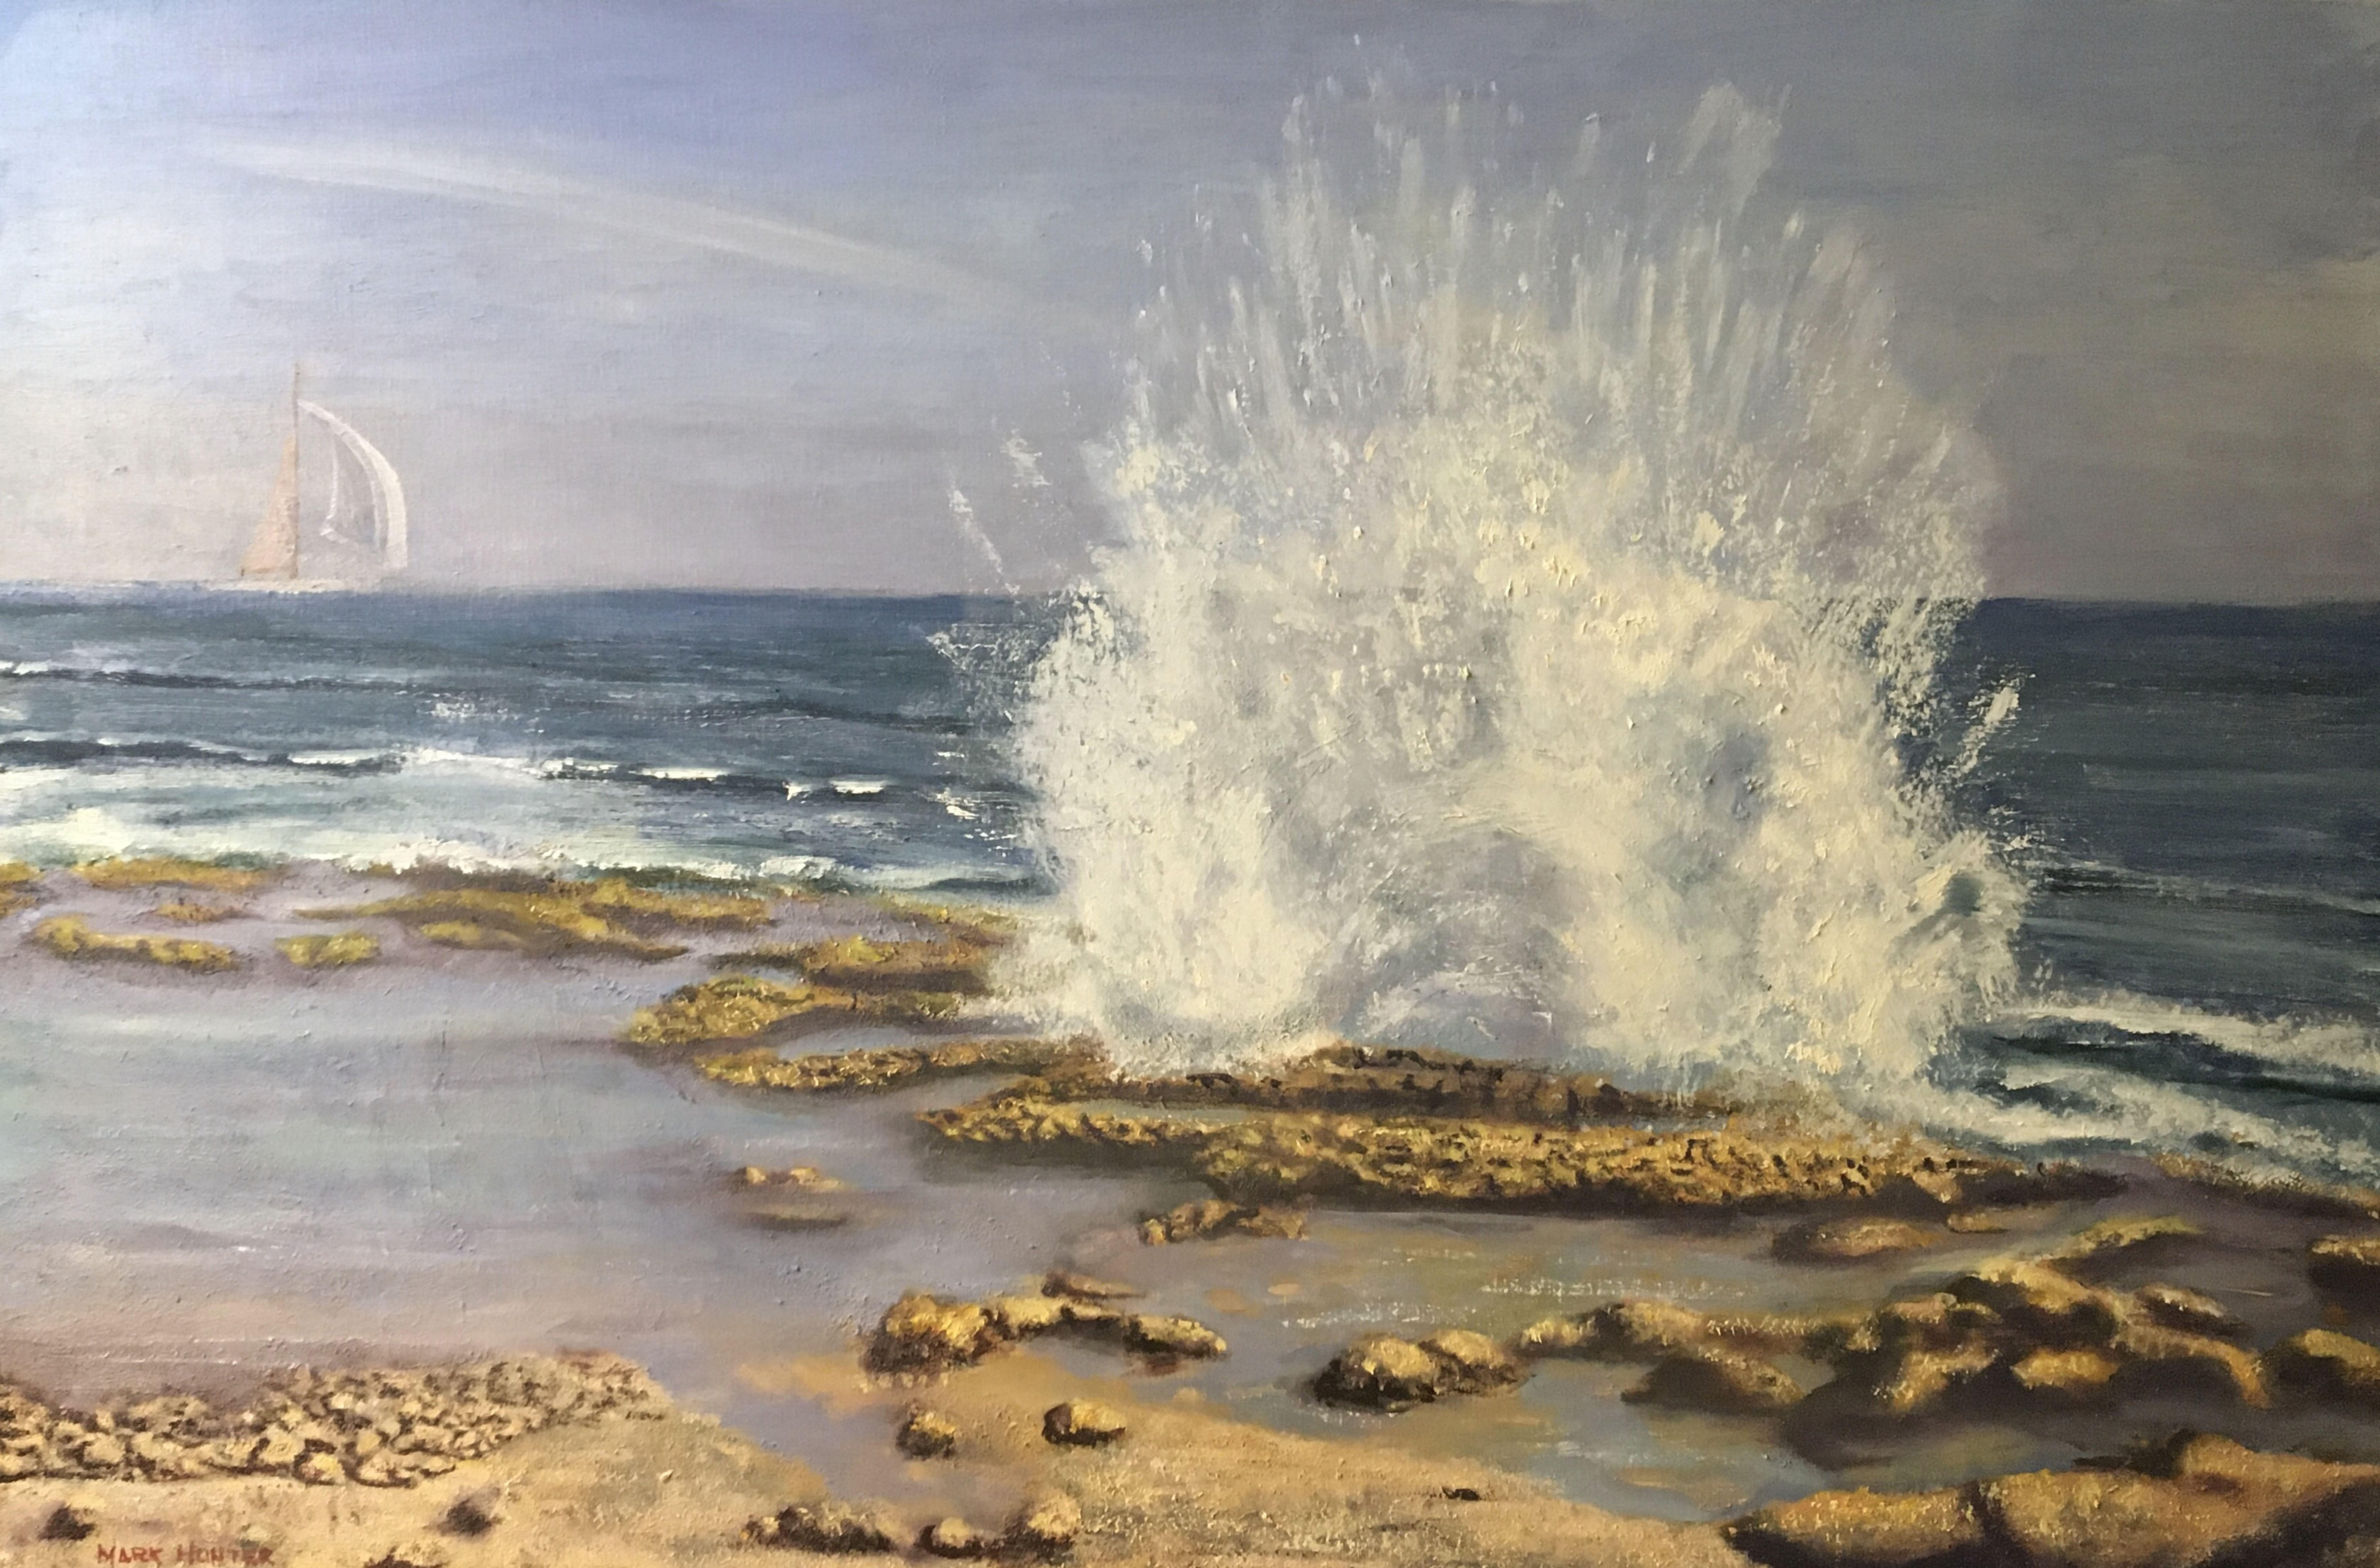 I was inspired by the power of the waves breaking on the beach. My goal was to have the viewer feel a sense of the place: experiencing the sound & power of the wave and feeling the water droplets and sun on their face. :: Painting :: Realism :: This